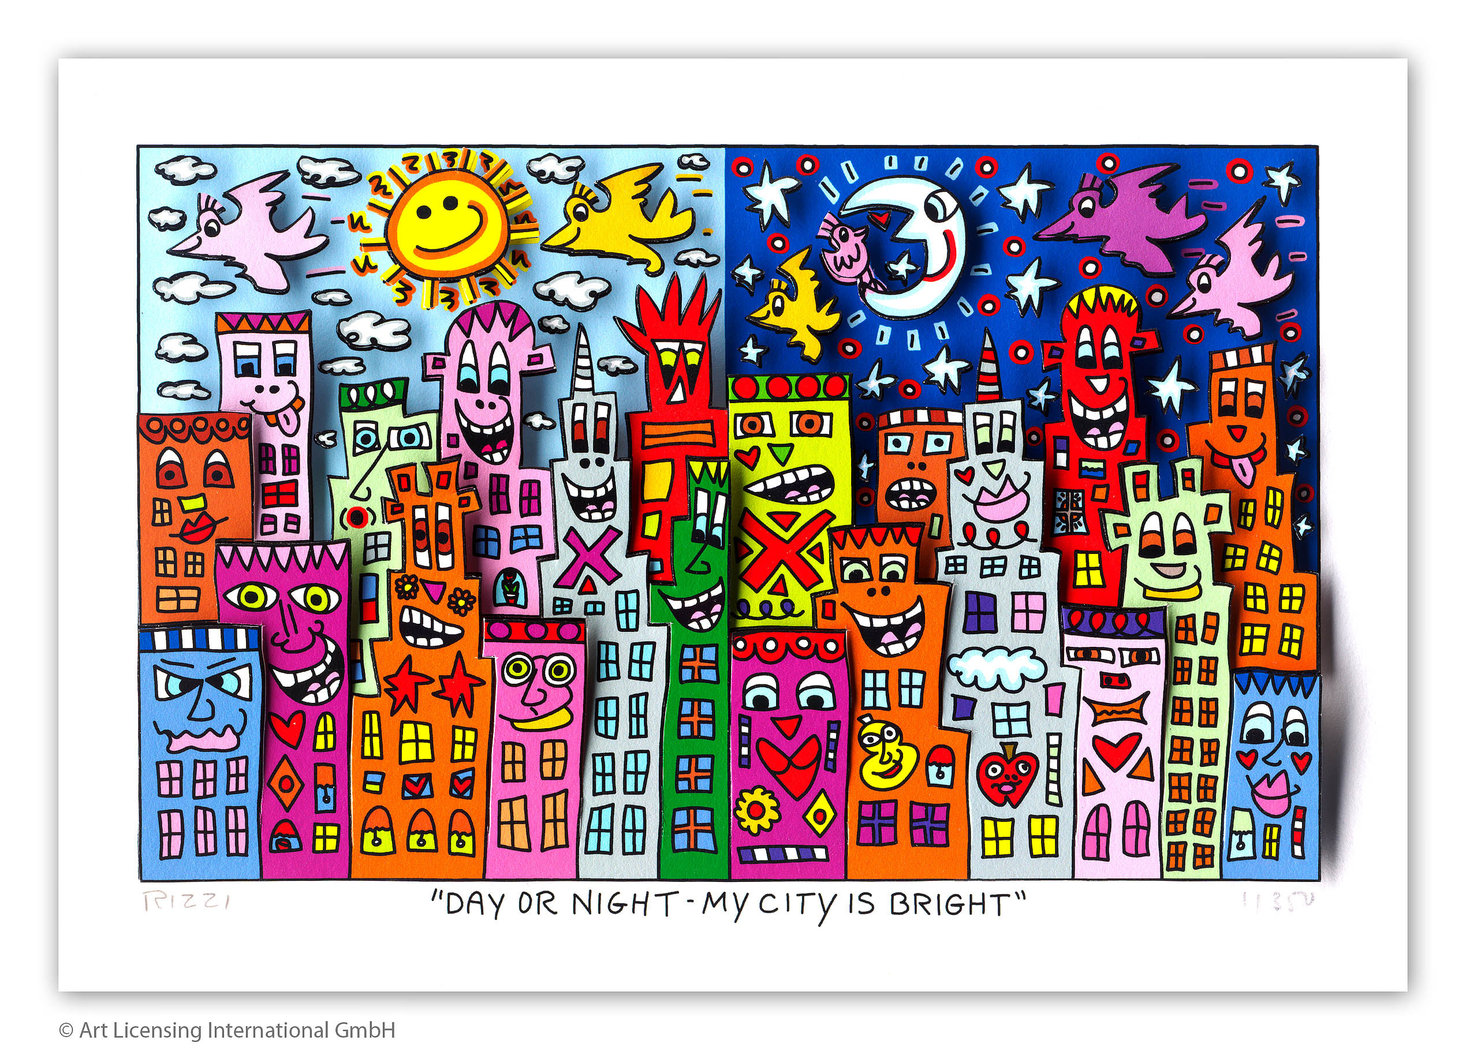 James Rizzi - DAY OR NIGHT - MY CITY IS BRIGHT